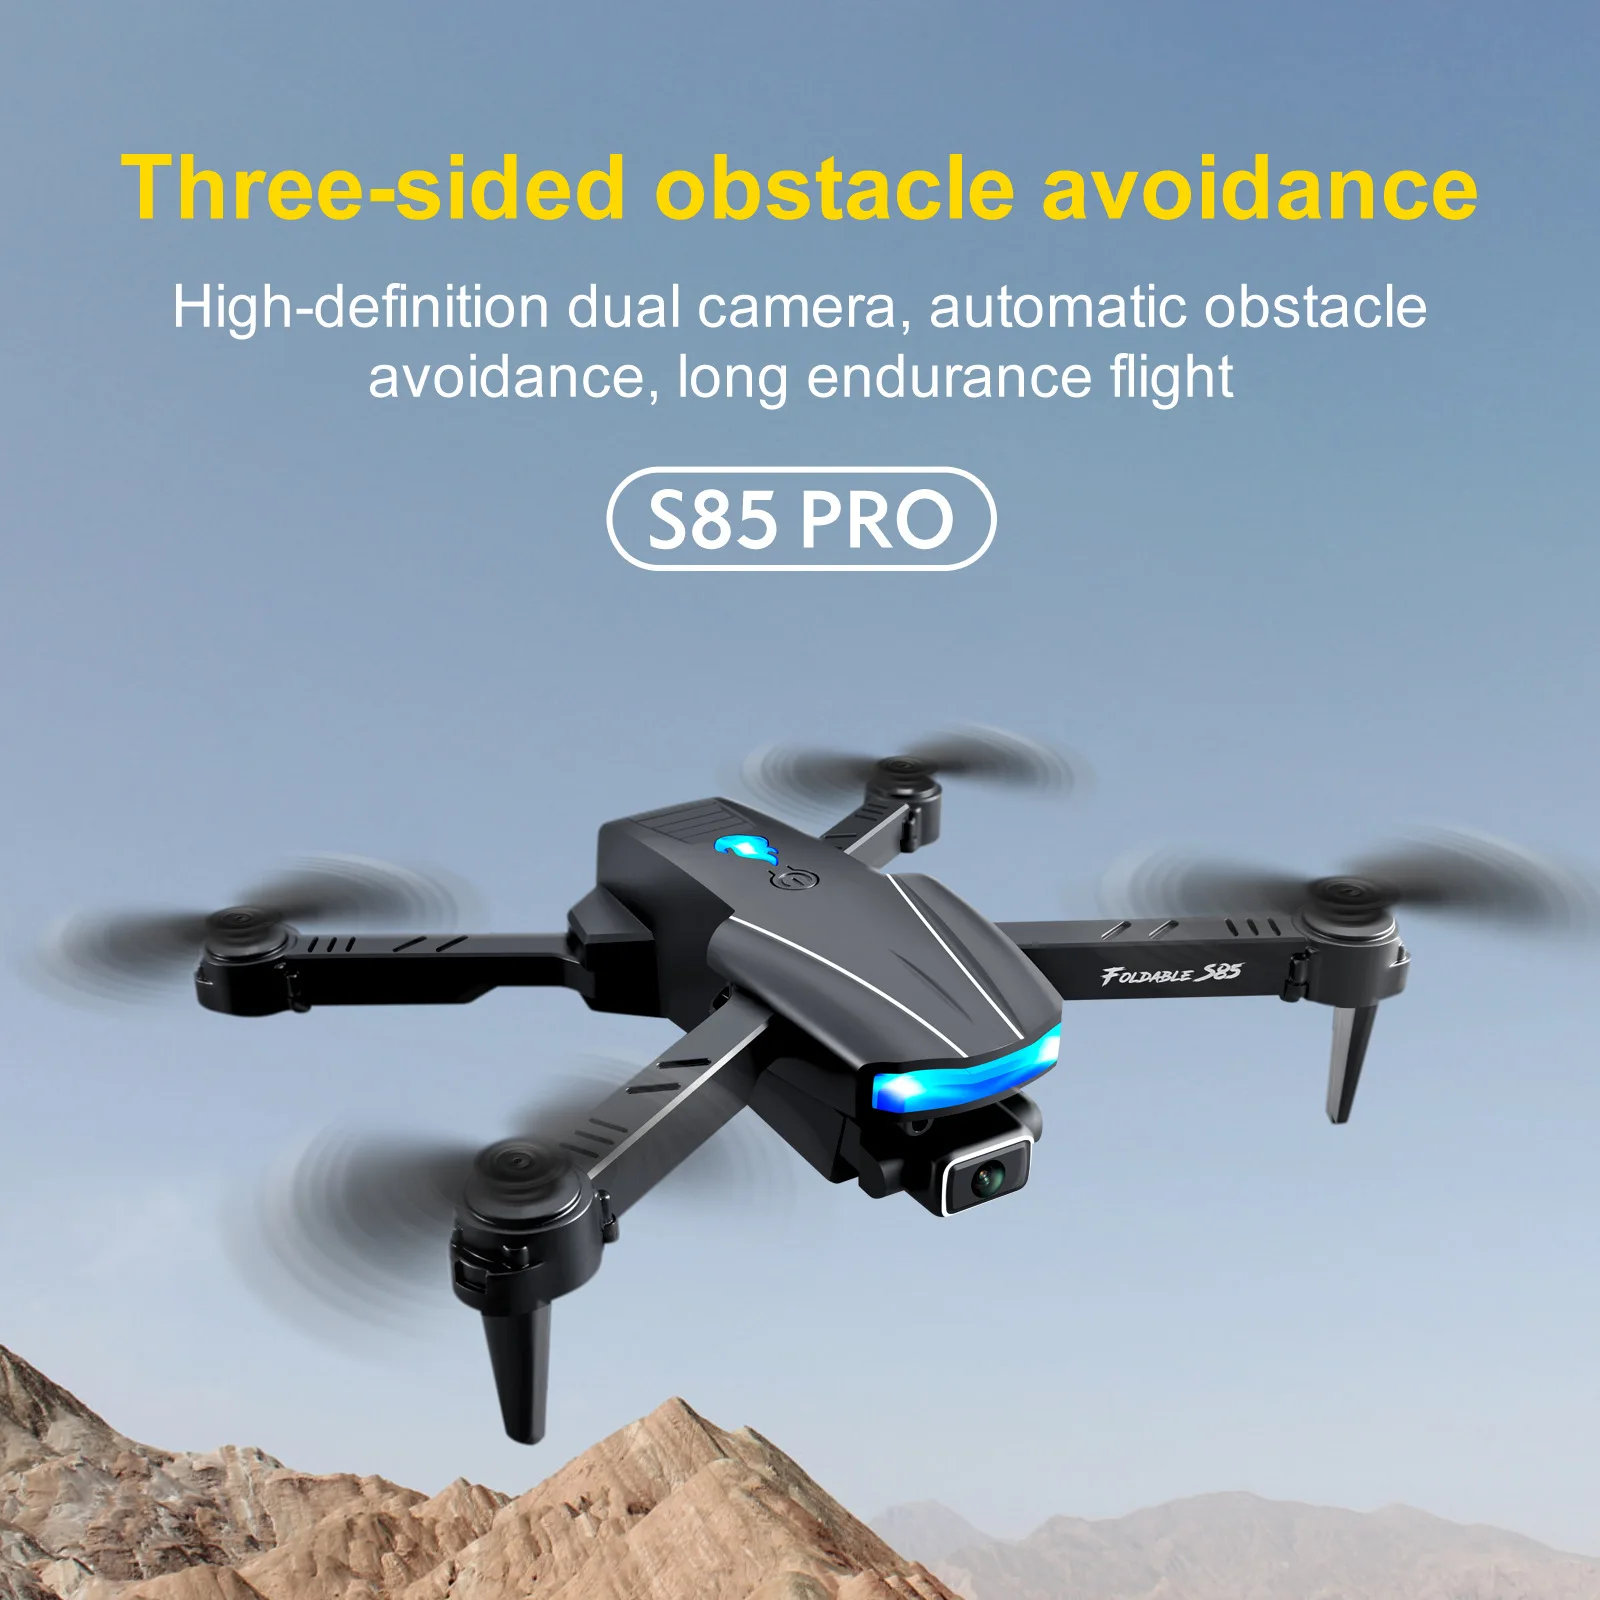 

1PC Drone 4k Profesional Mini S85 Pro HD 4K 1080p Camera Obstacle Avoidance Wifi Fpv Maintaining Rc Foldable 3-sided Drones